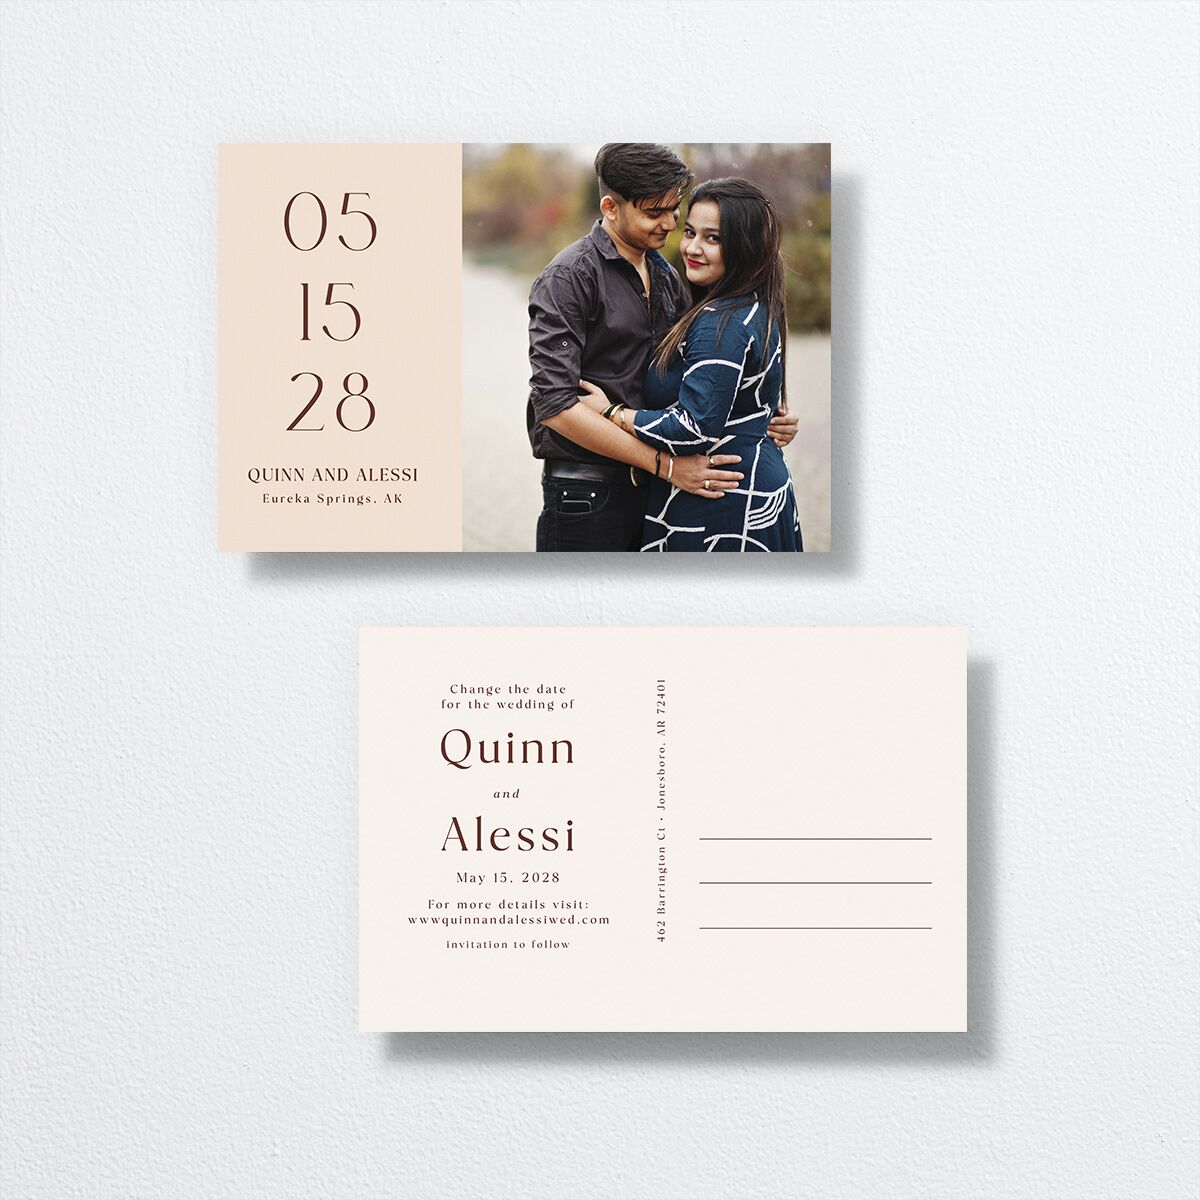 Sunlit Vows Change the Date Postcards front-and-back in orange